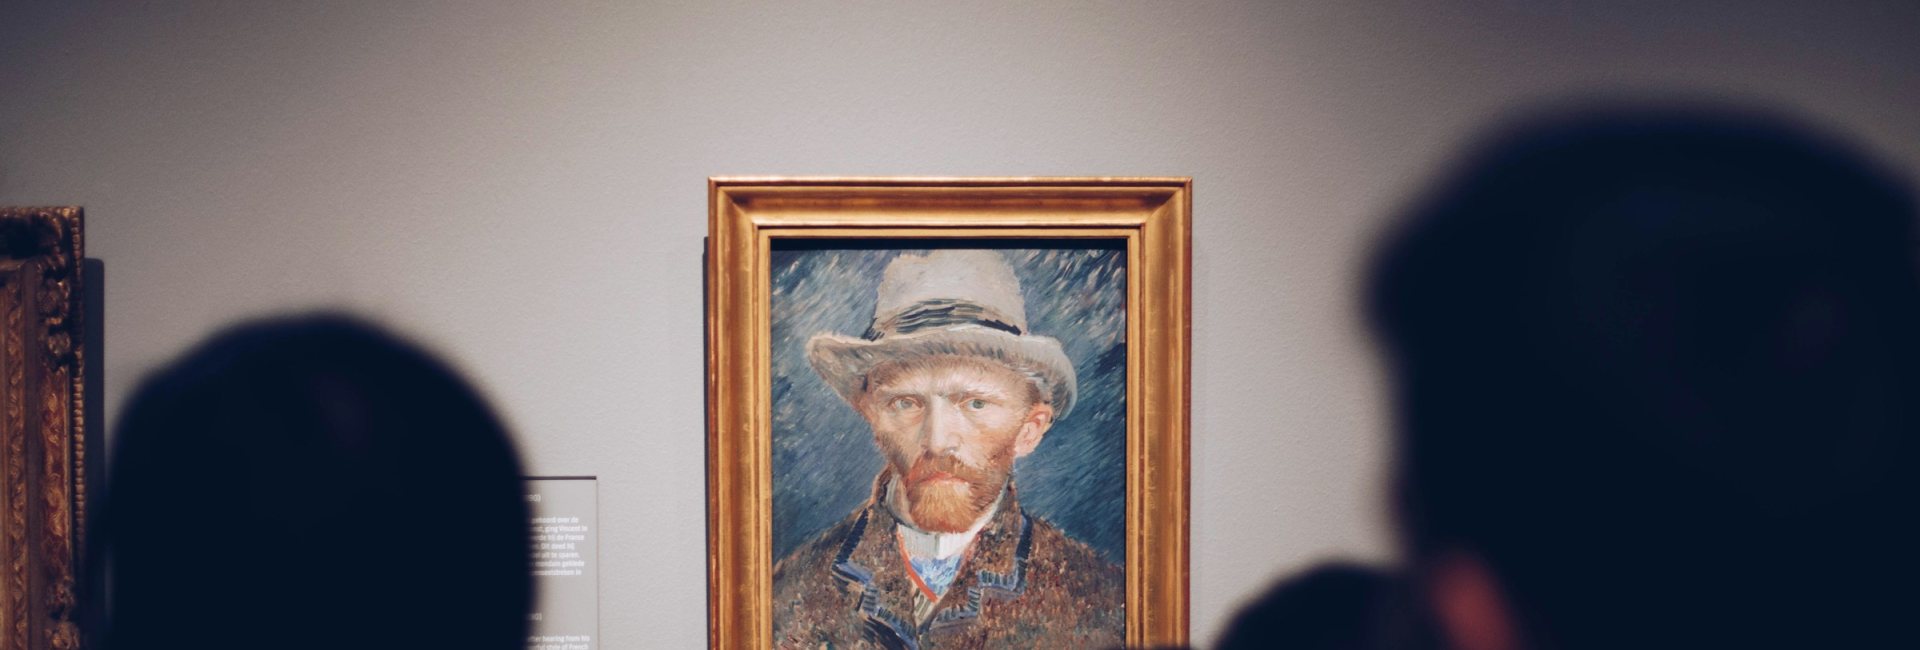 8 Tips For Keeping Your Art Collections Safe From Theft